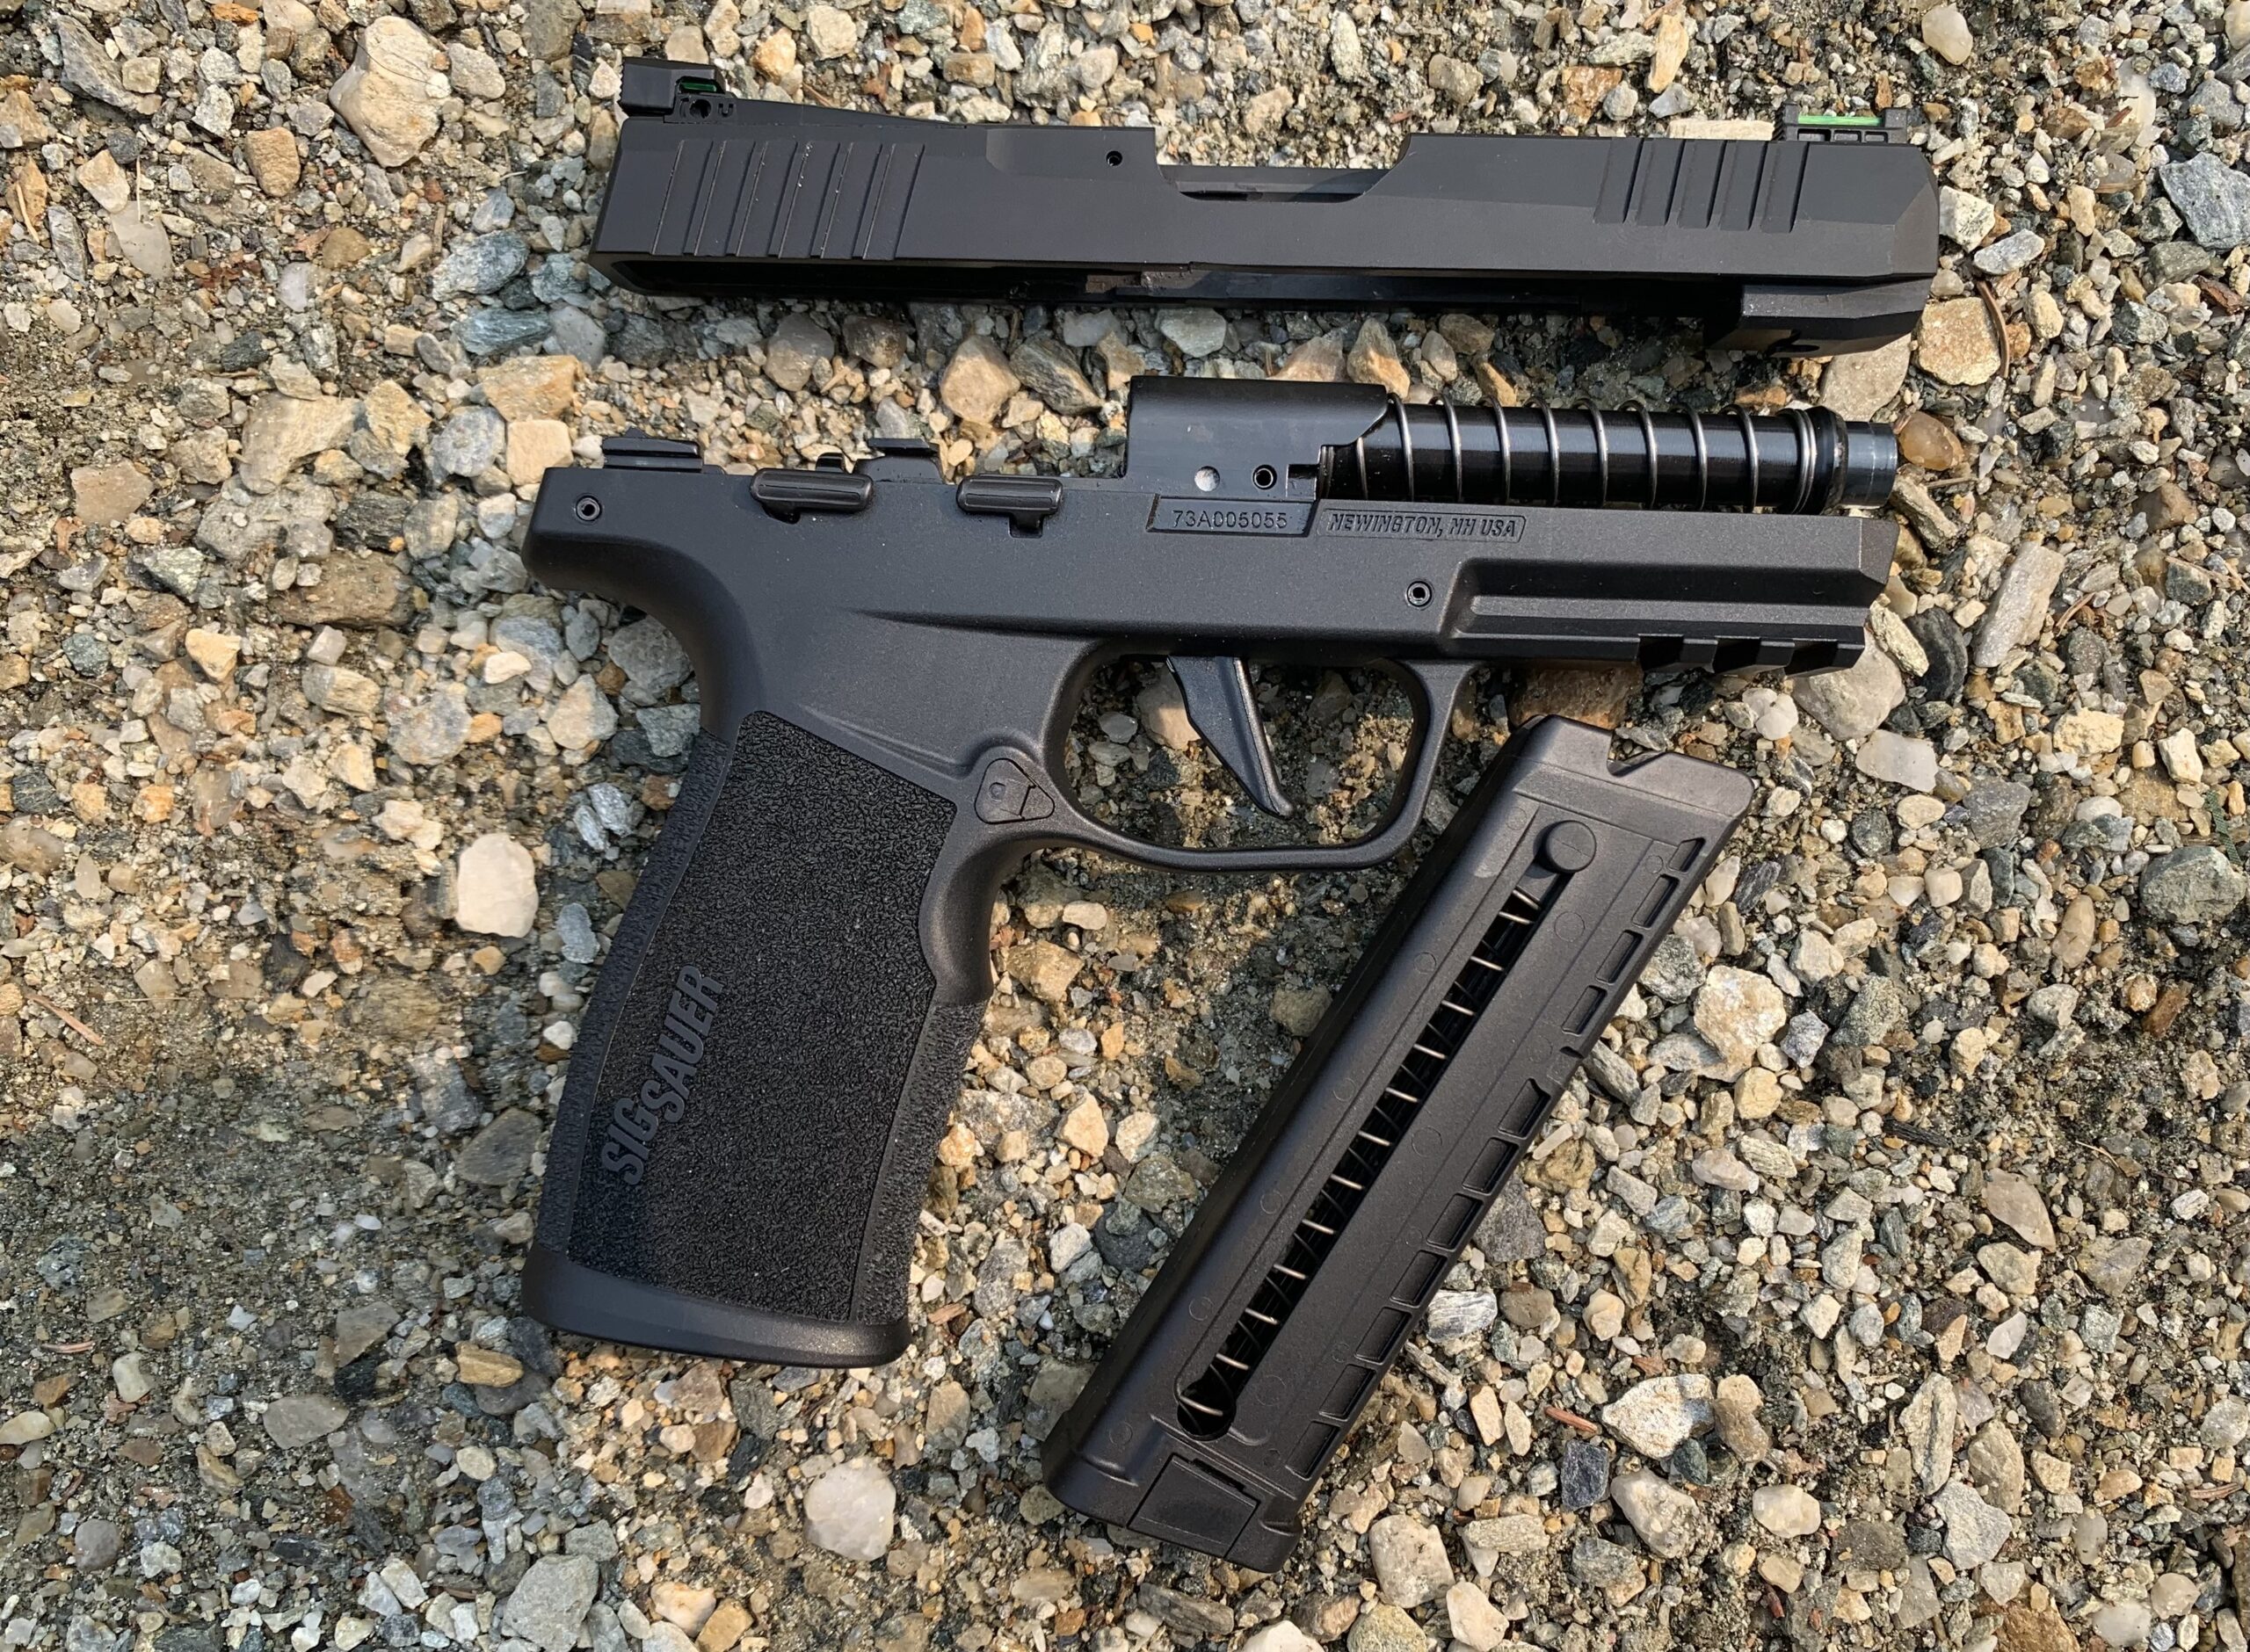 A field-stripped Sig P322